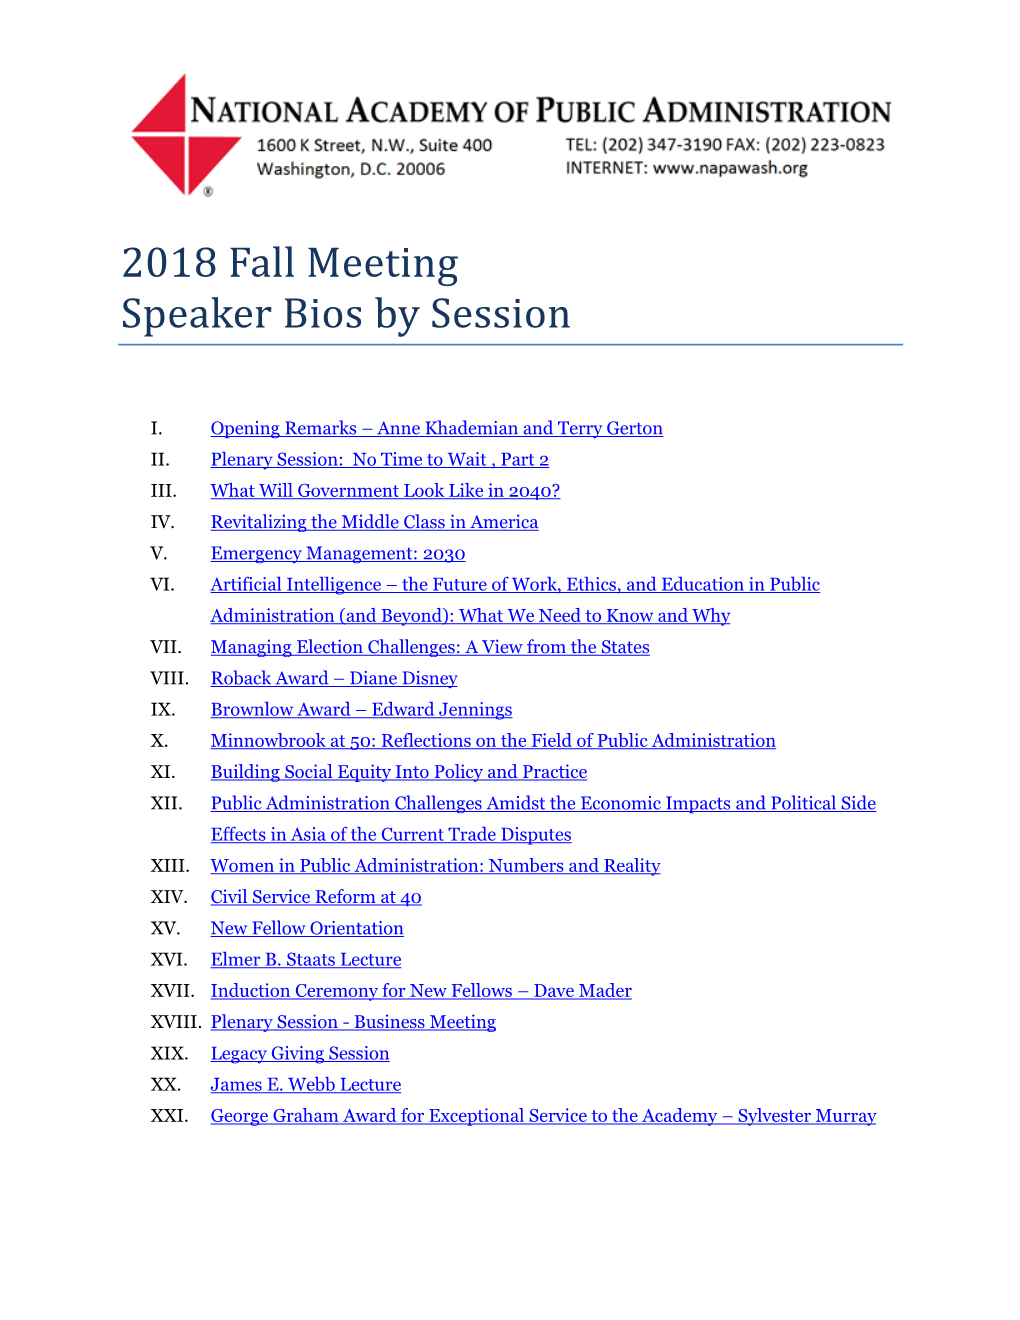 2018 Fall Meeting Speaker Bios by Session